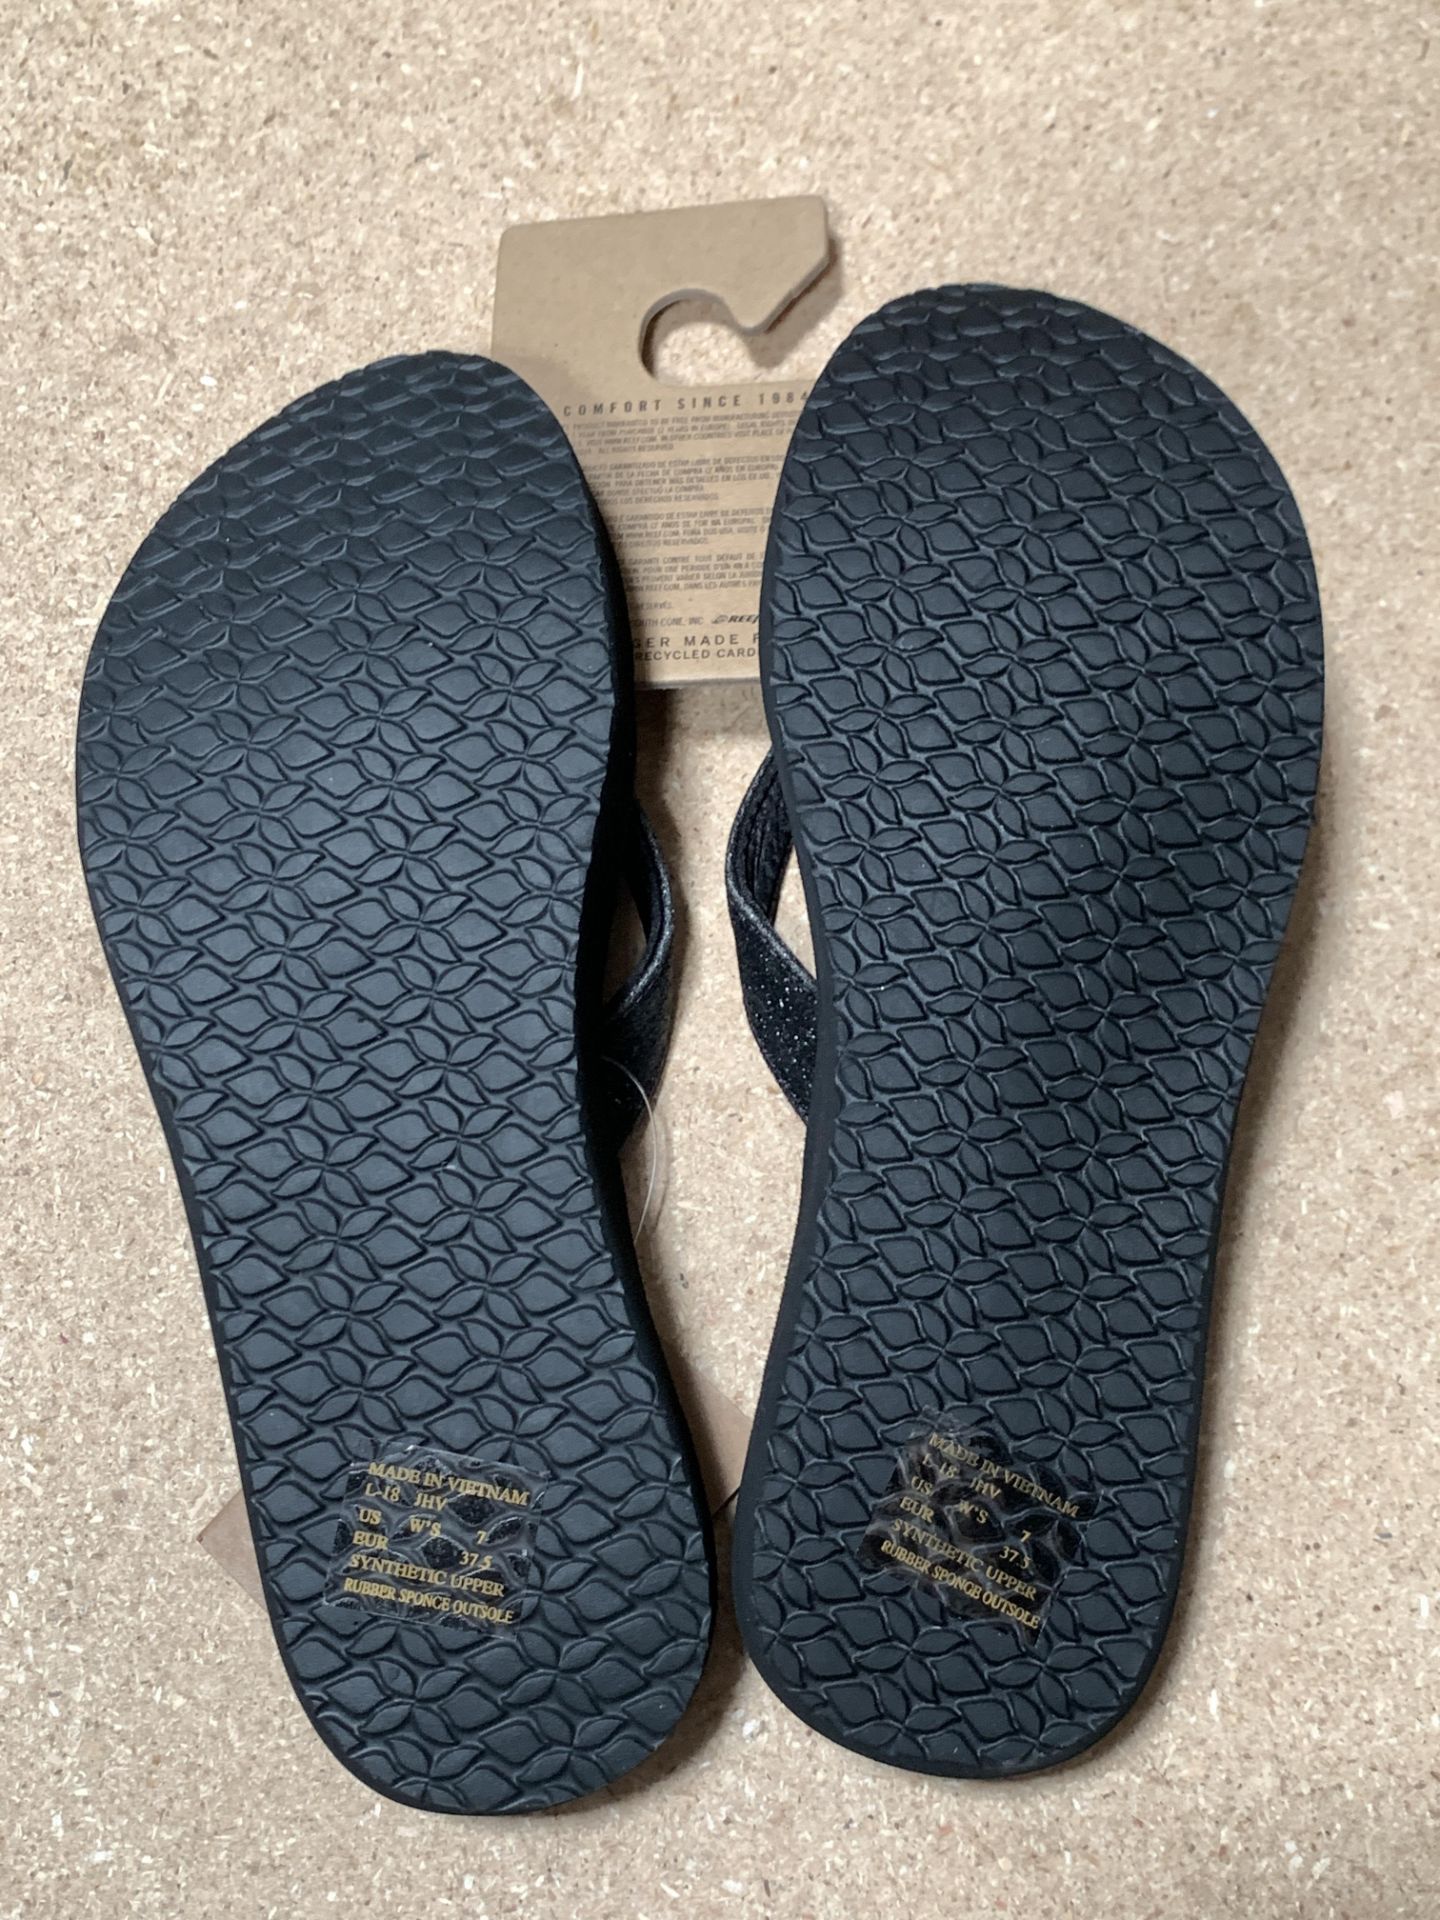 6 Pairs REEF Flip Flop Sandals, Star Cushion Black, New w. Tags, Various Sizes (Retail $282) - Image 5 of 5